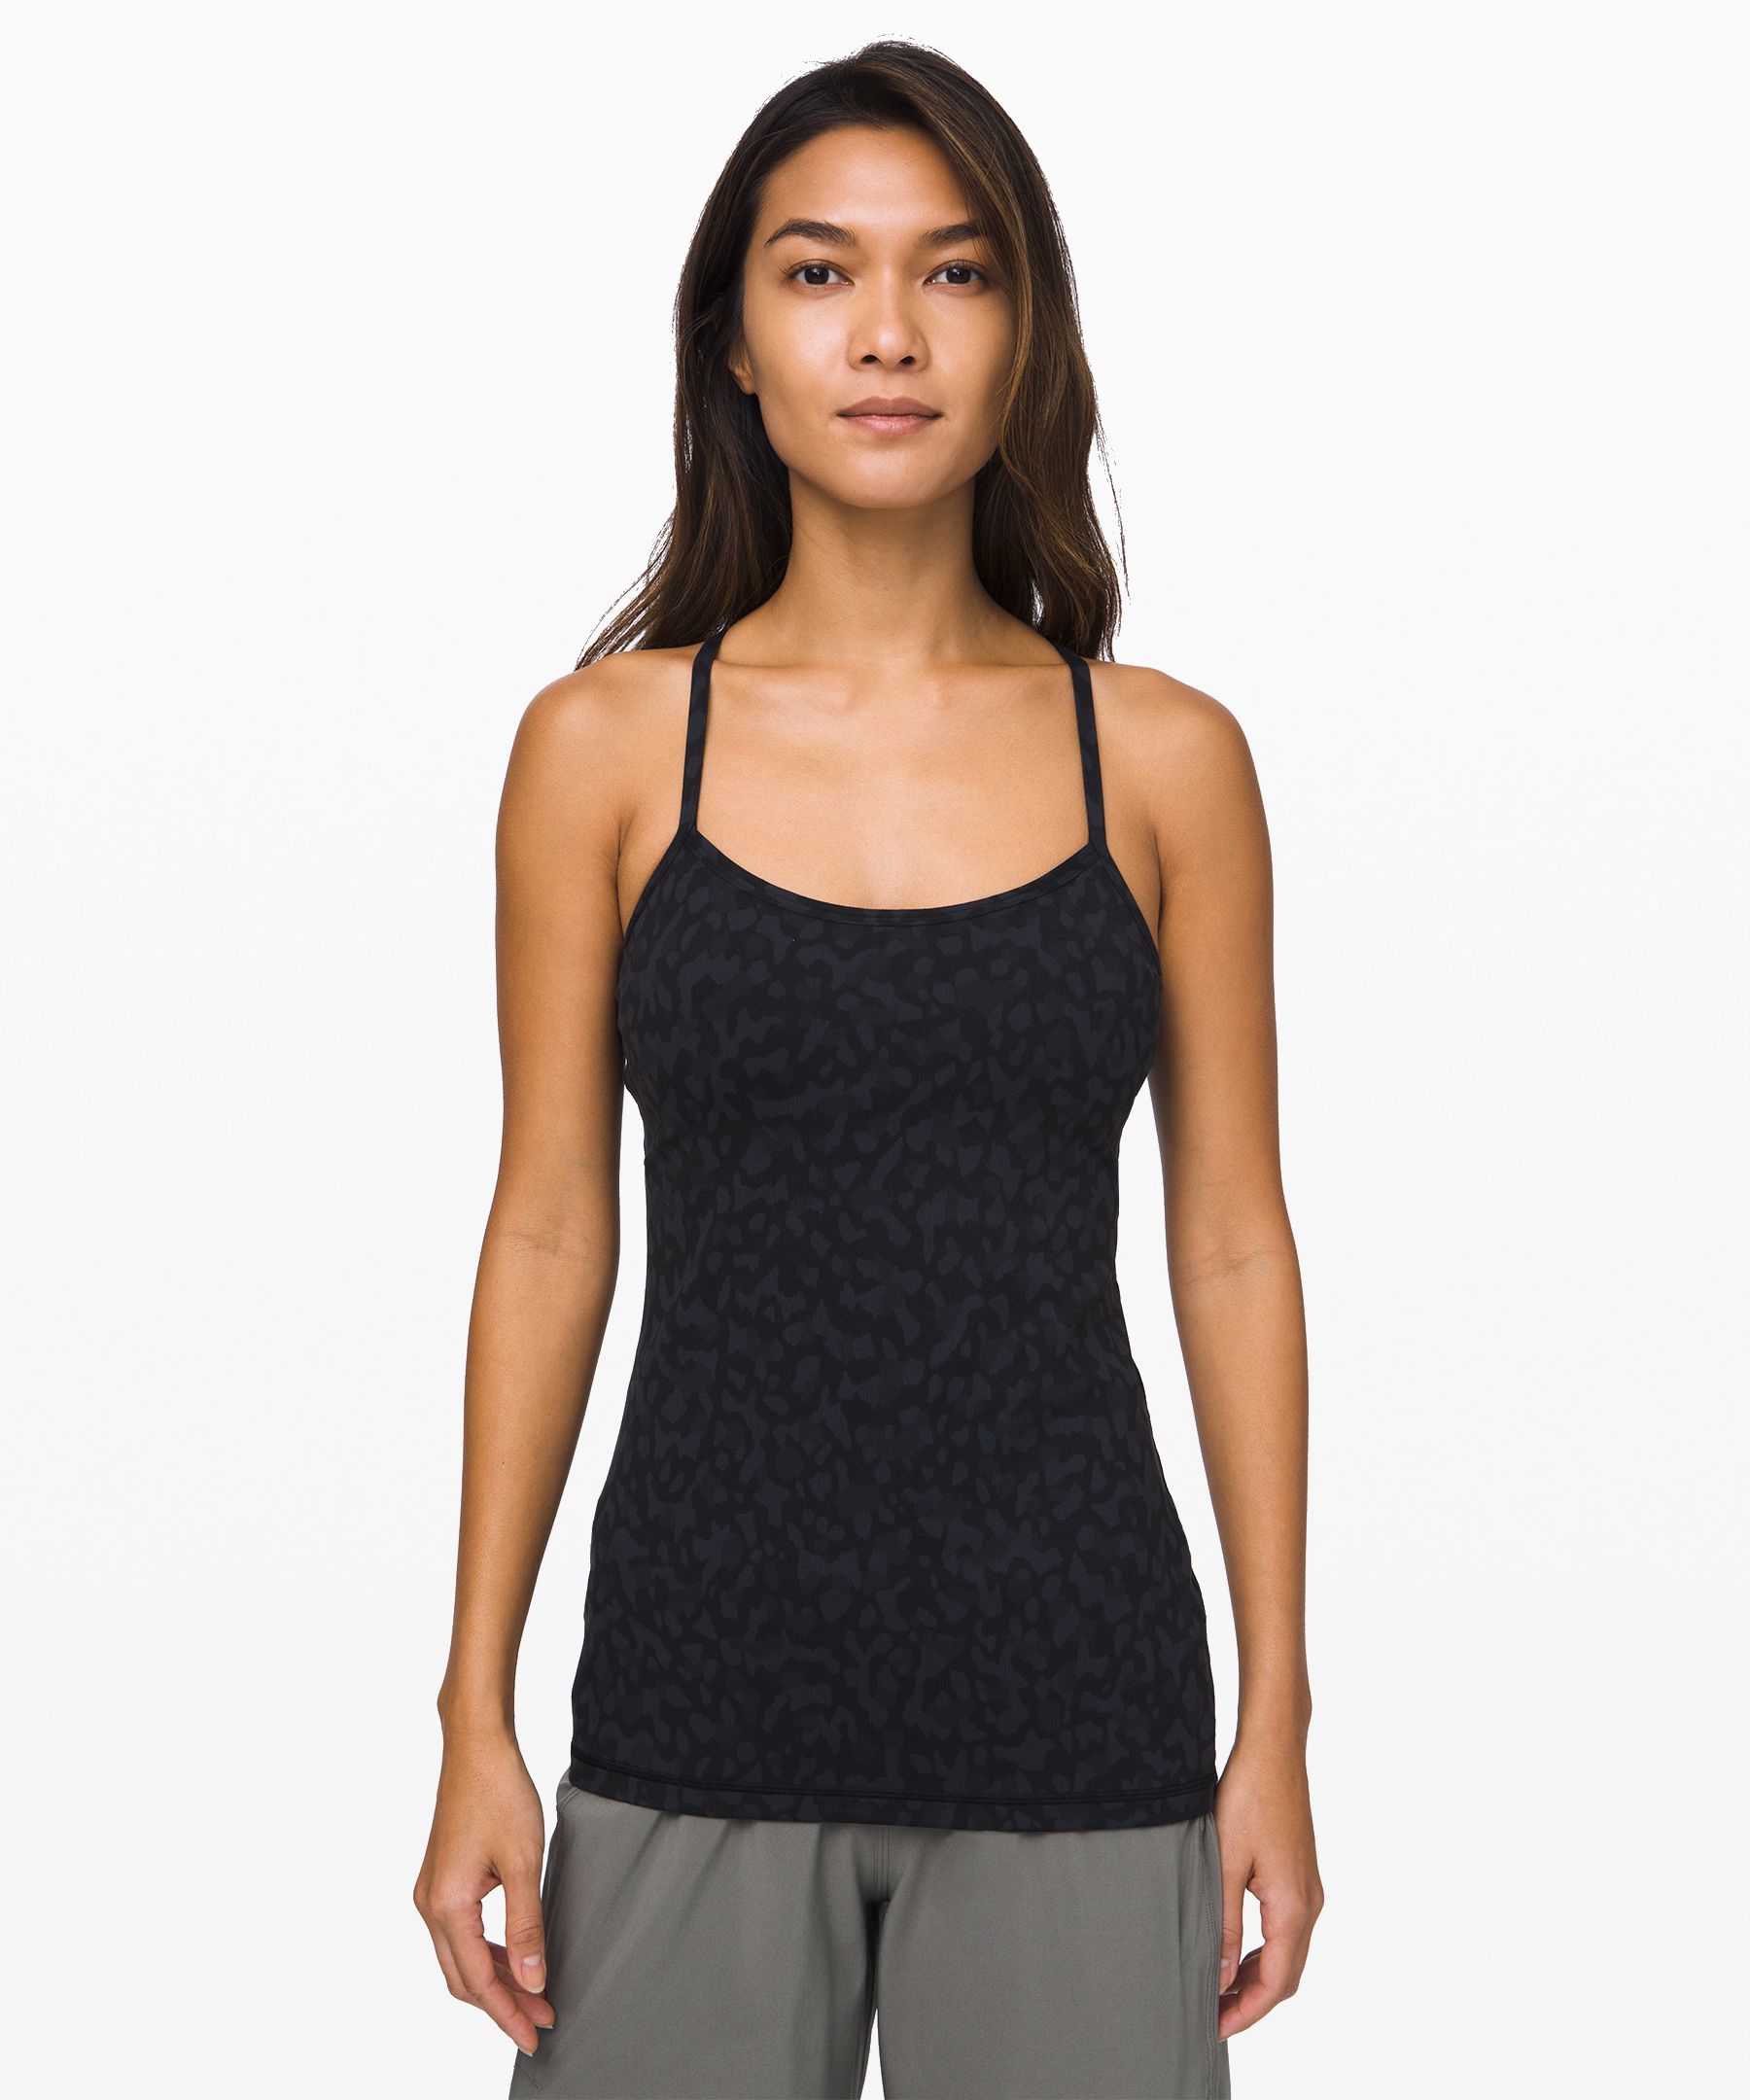 Is there a difference between formation camo deep coal multi and formation  camo deep coal multi/black? It looks the same to me. : r/lululemon